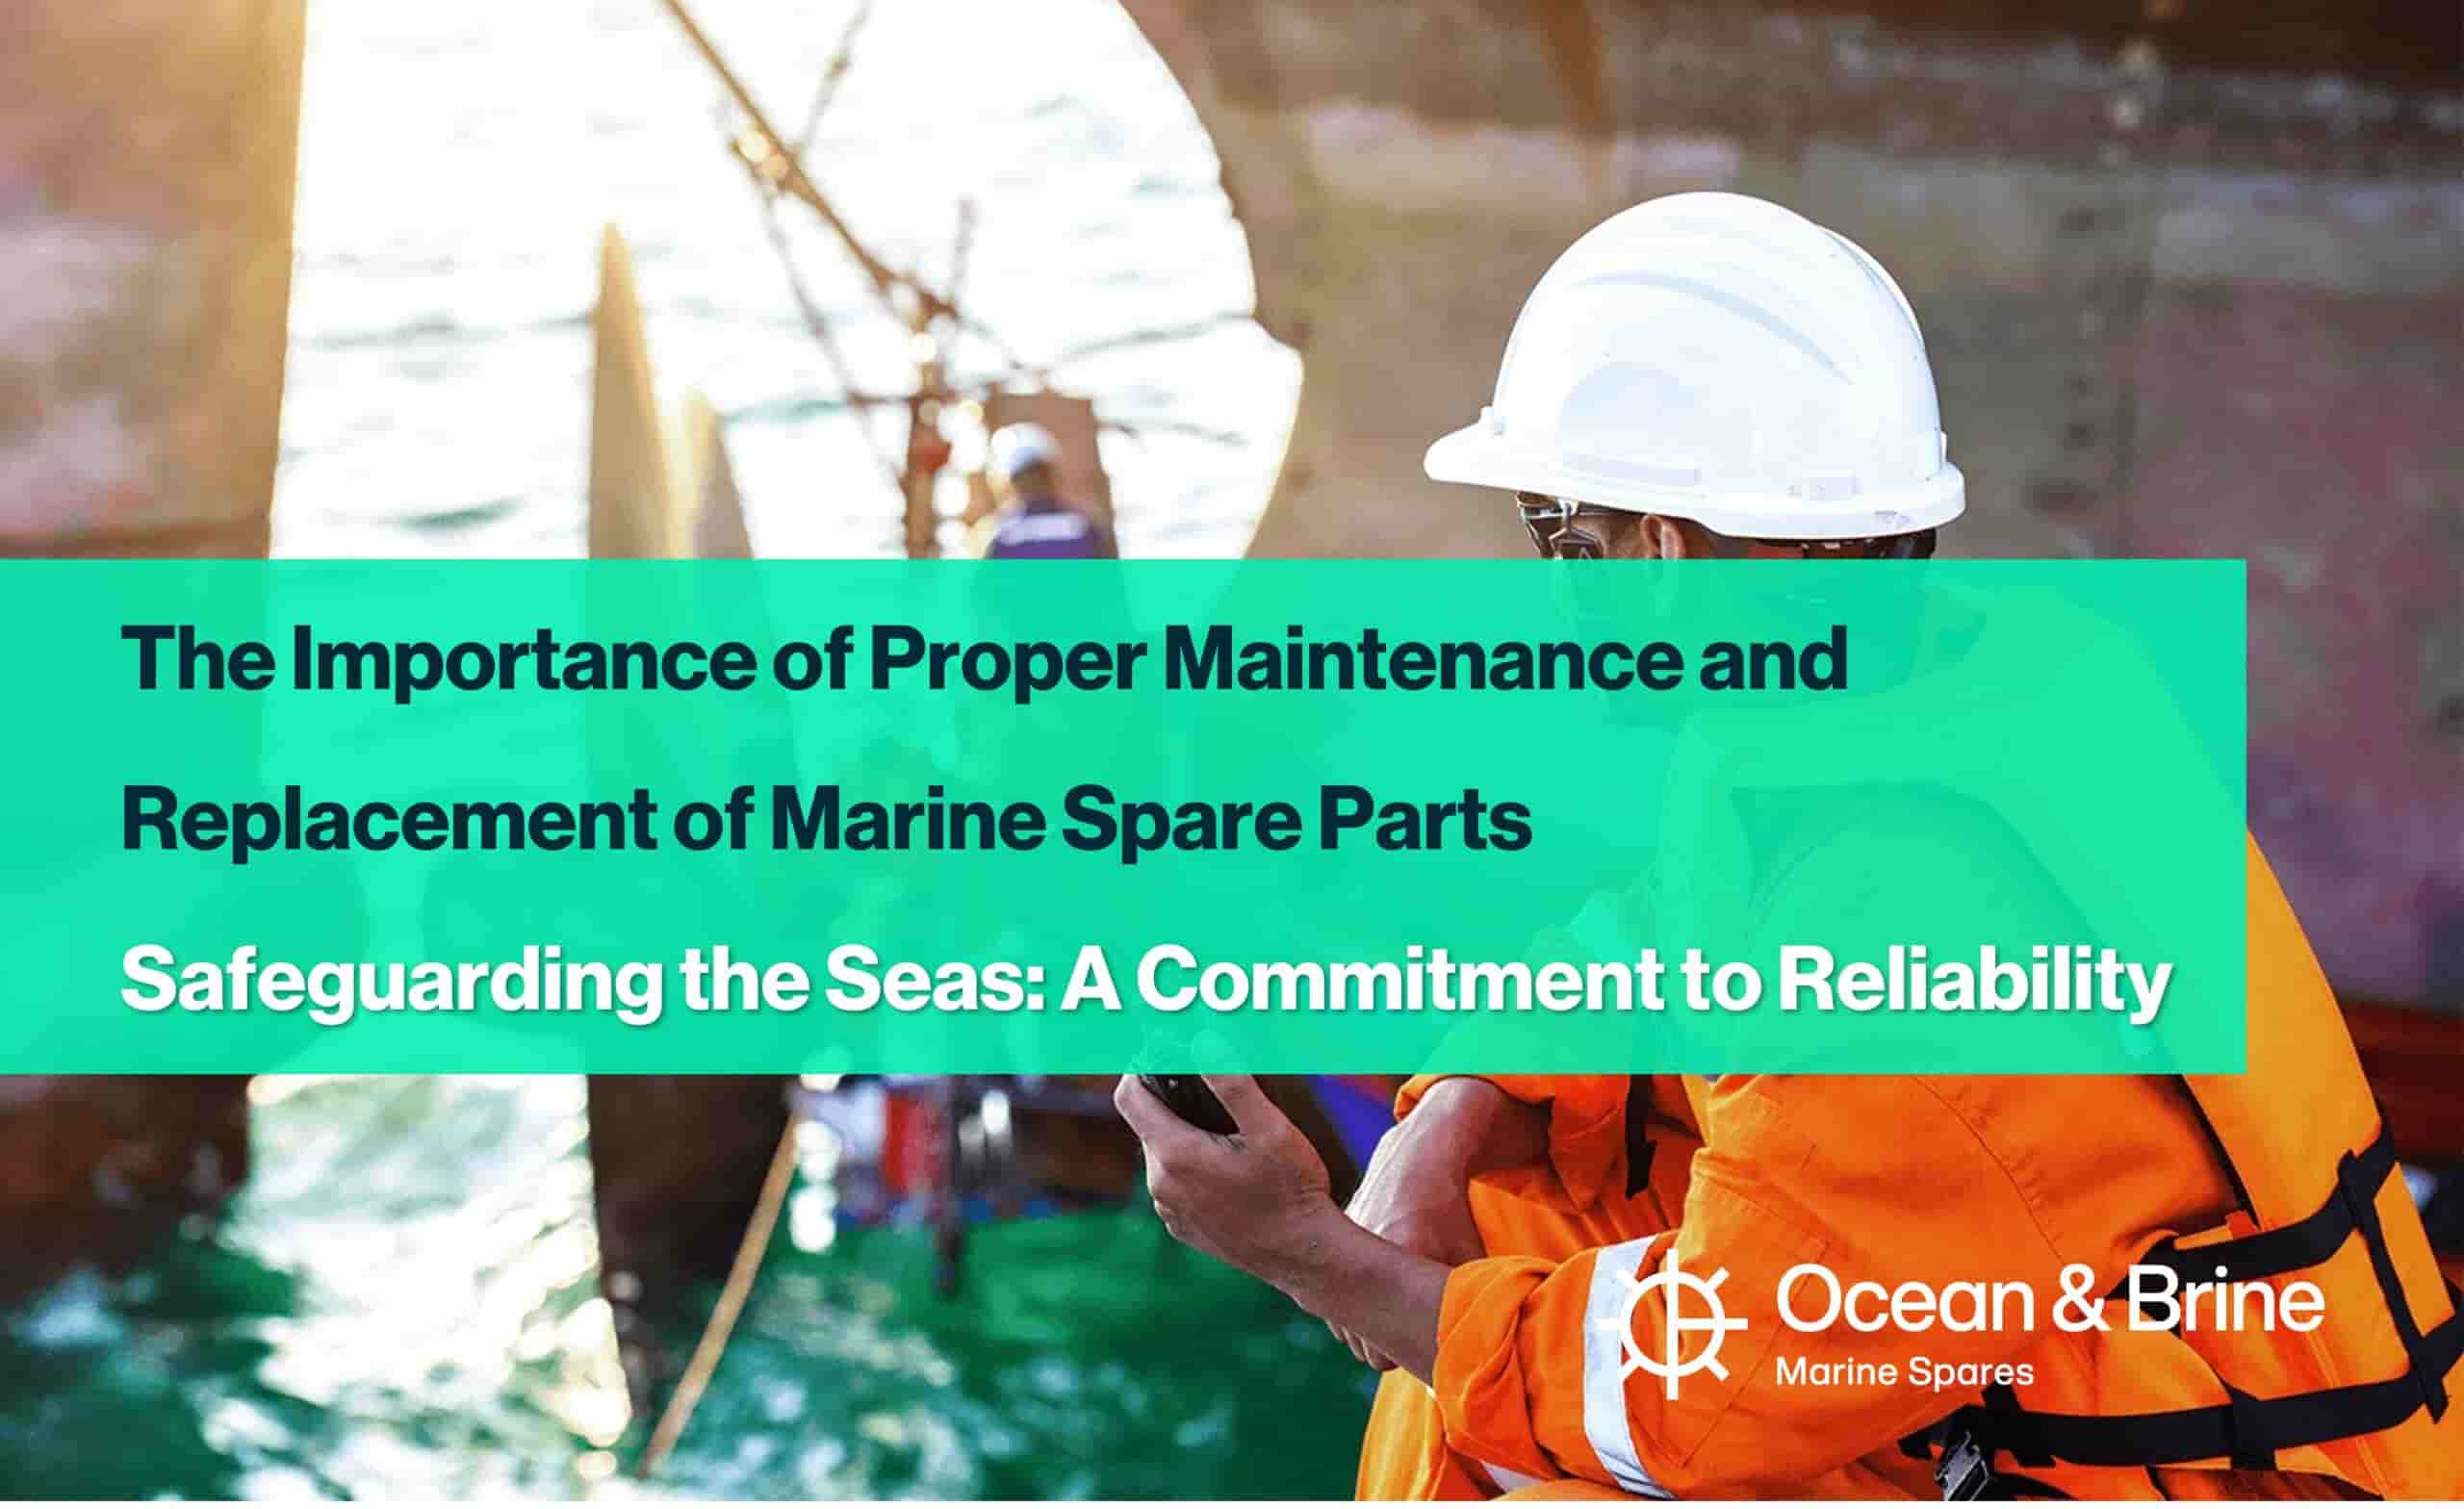 The Importance of Proper Maintenance and Replacement of Marine Spare Parts